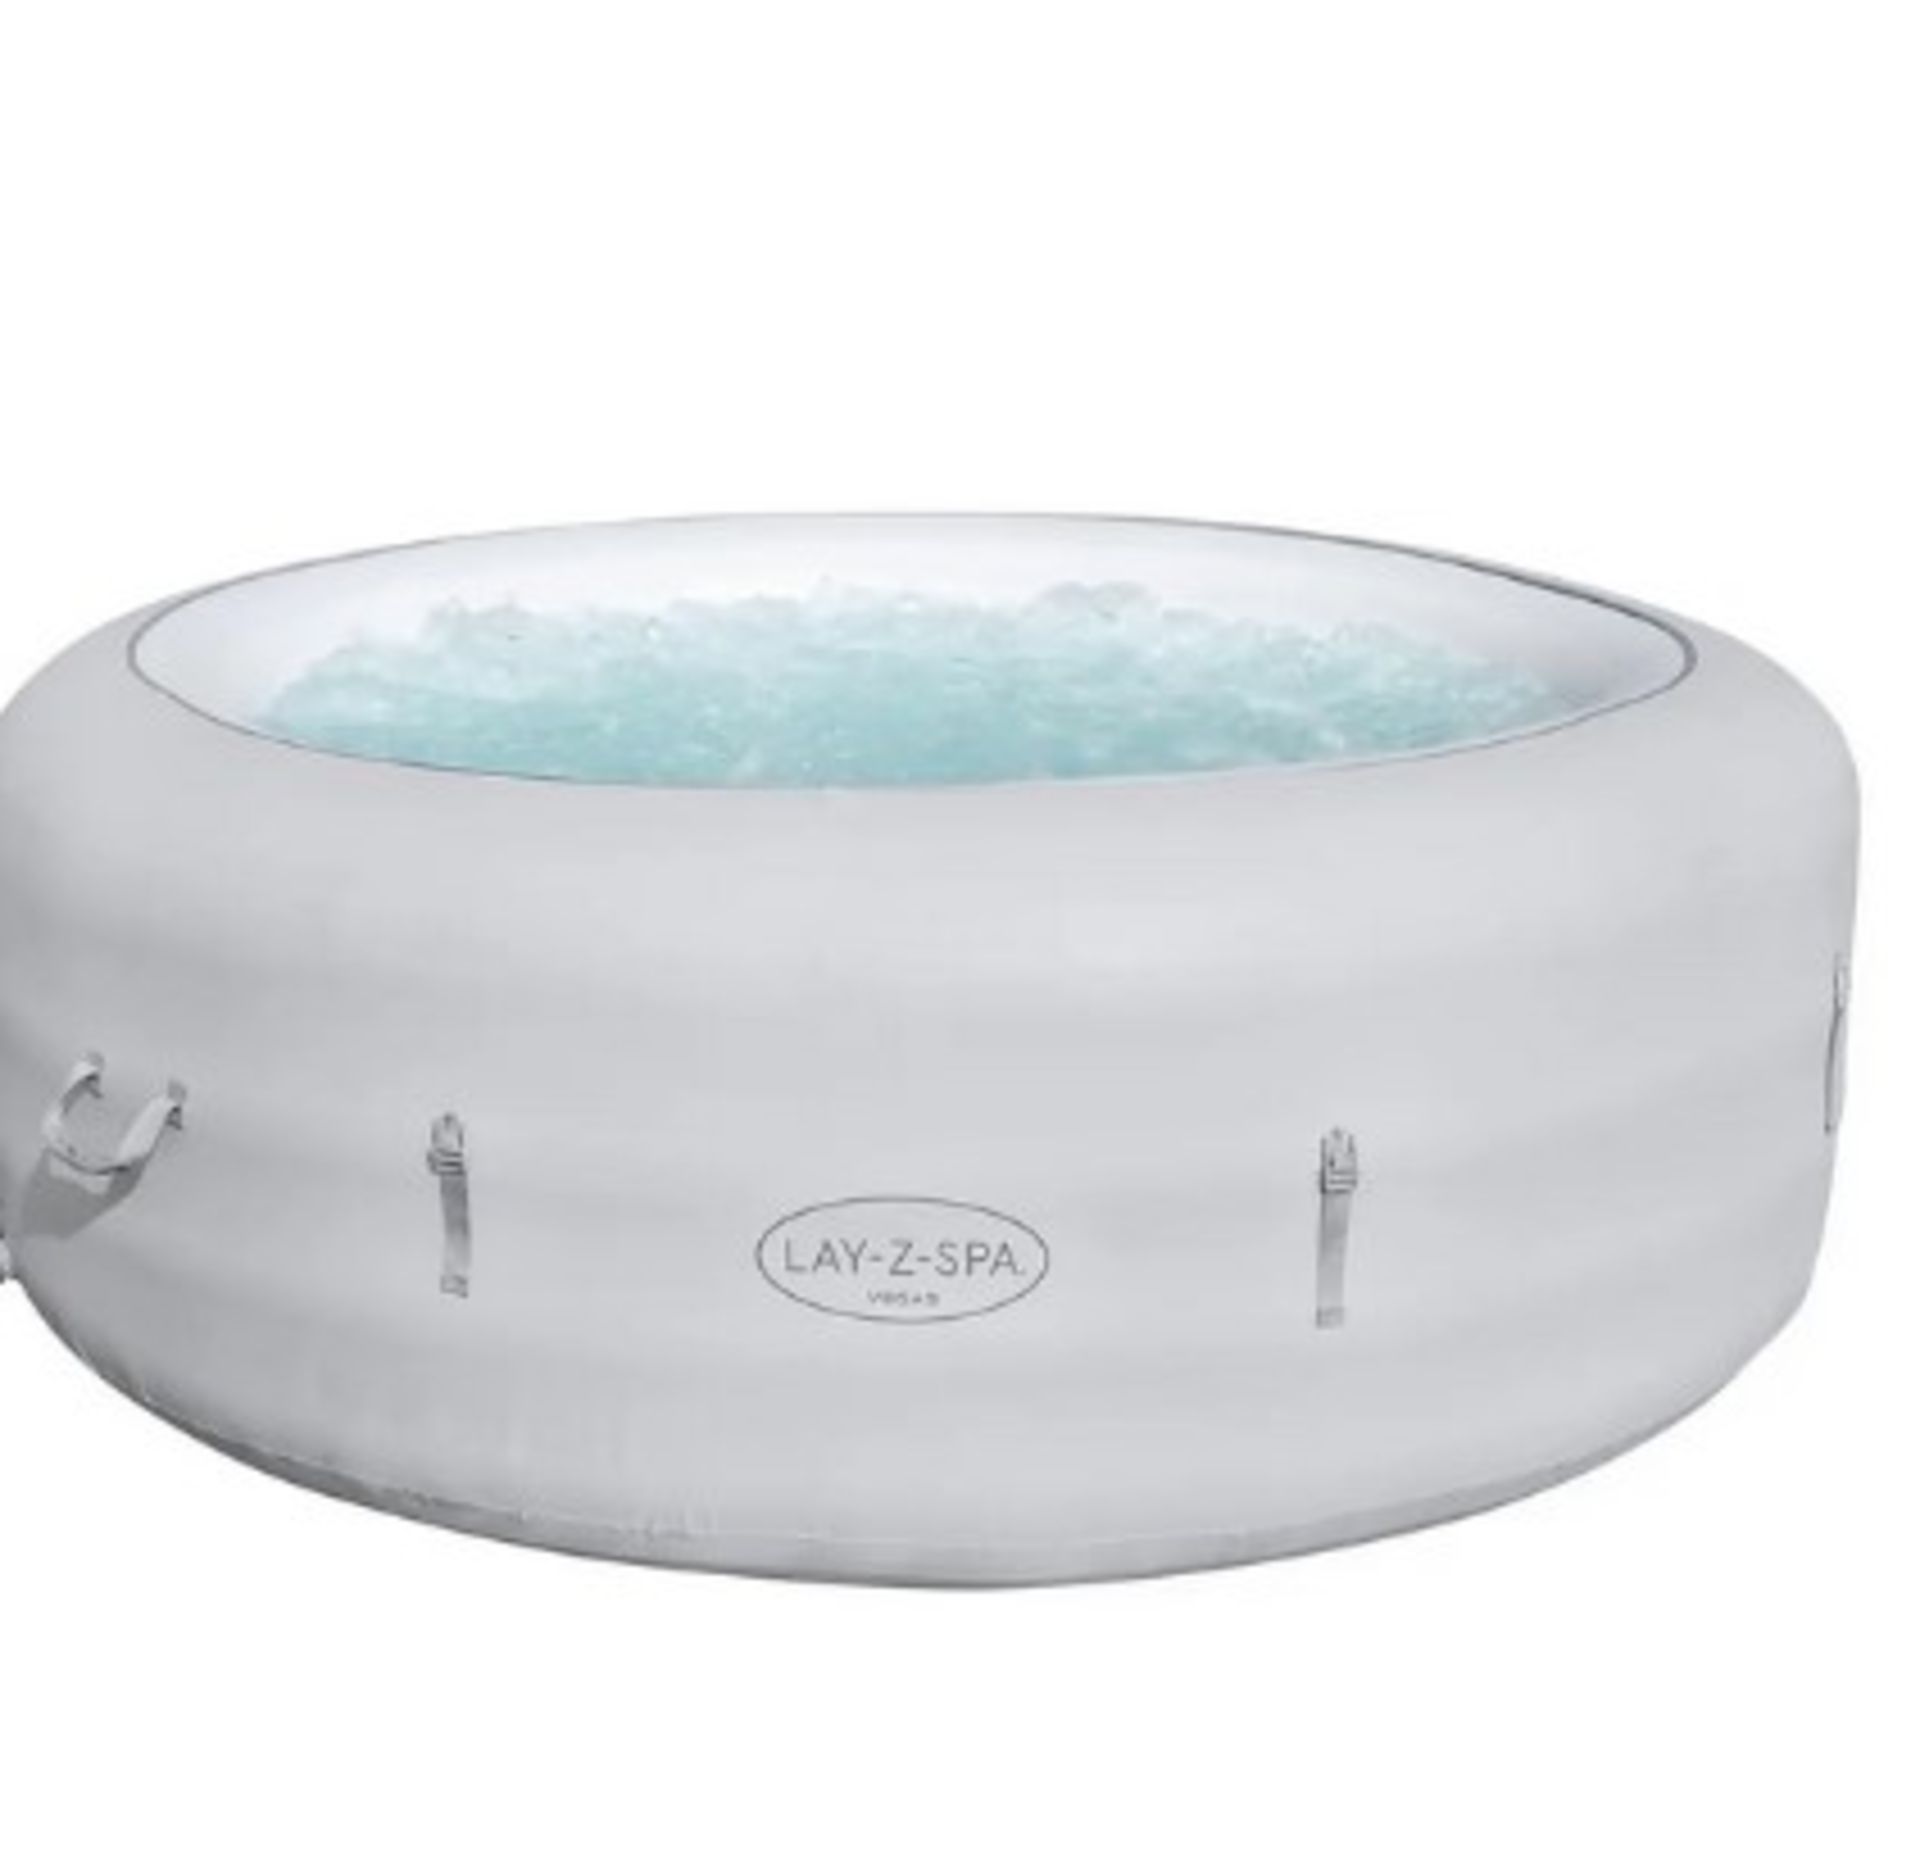 (25/Mez) RRP £490. Lay-Z-Spa Vegas 6 Person Portable Spa . (Unchecked Direct Warehouse Return). - Image 2 of 4